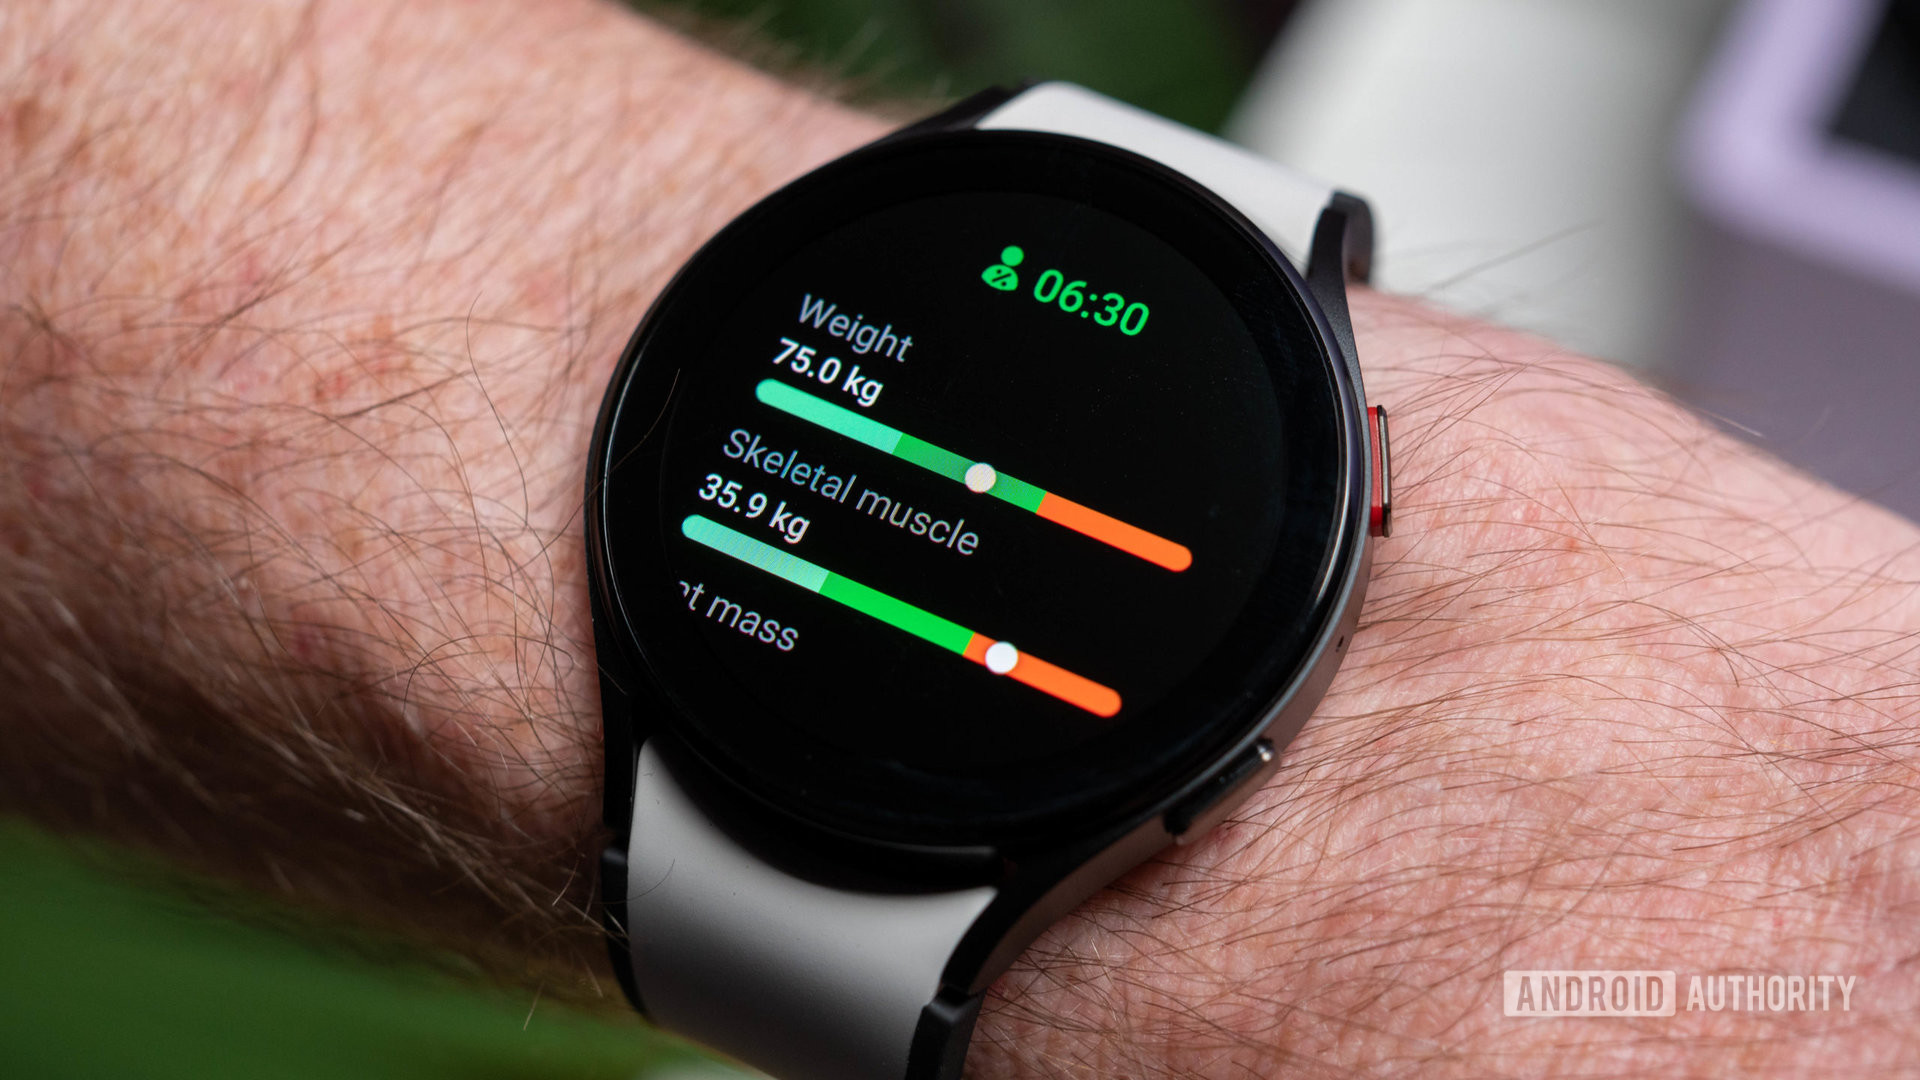 Samsung Galaxy Watch 5 in graphite black color with black and white strap on wrist showing body composition data